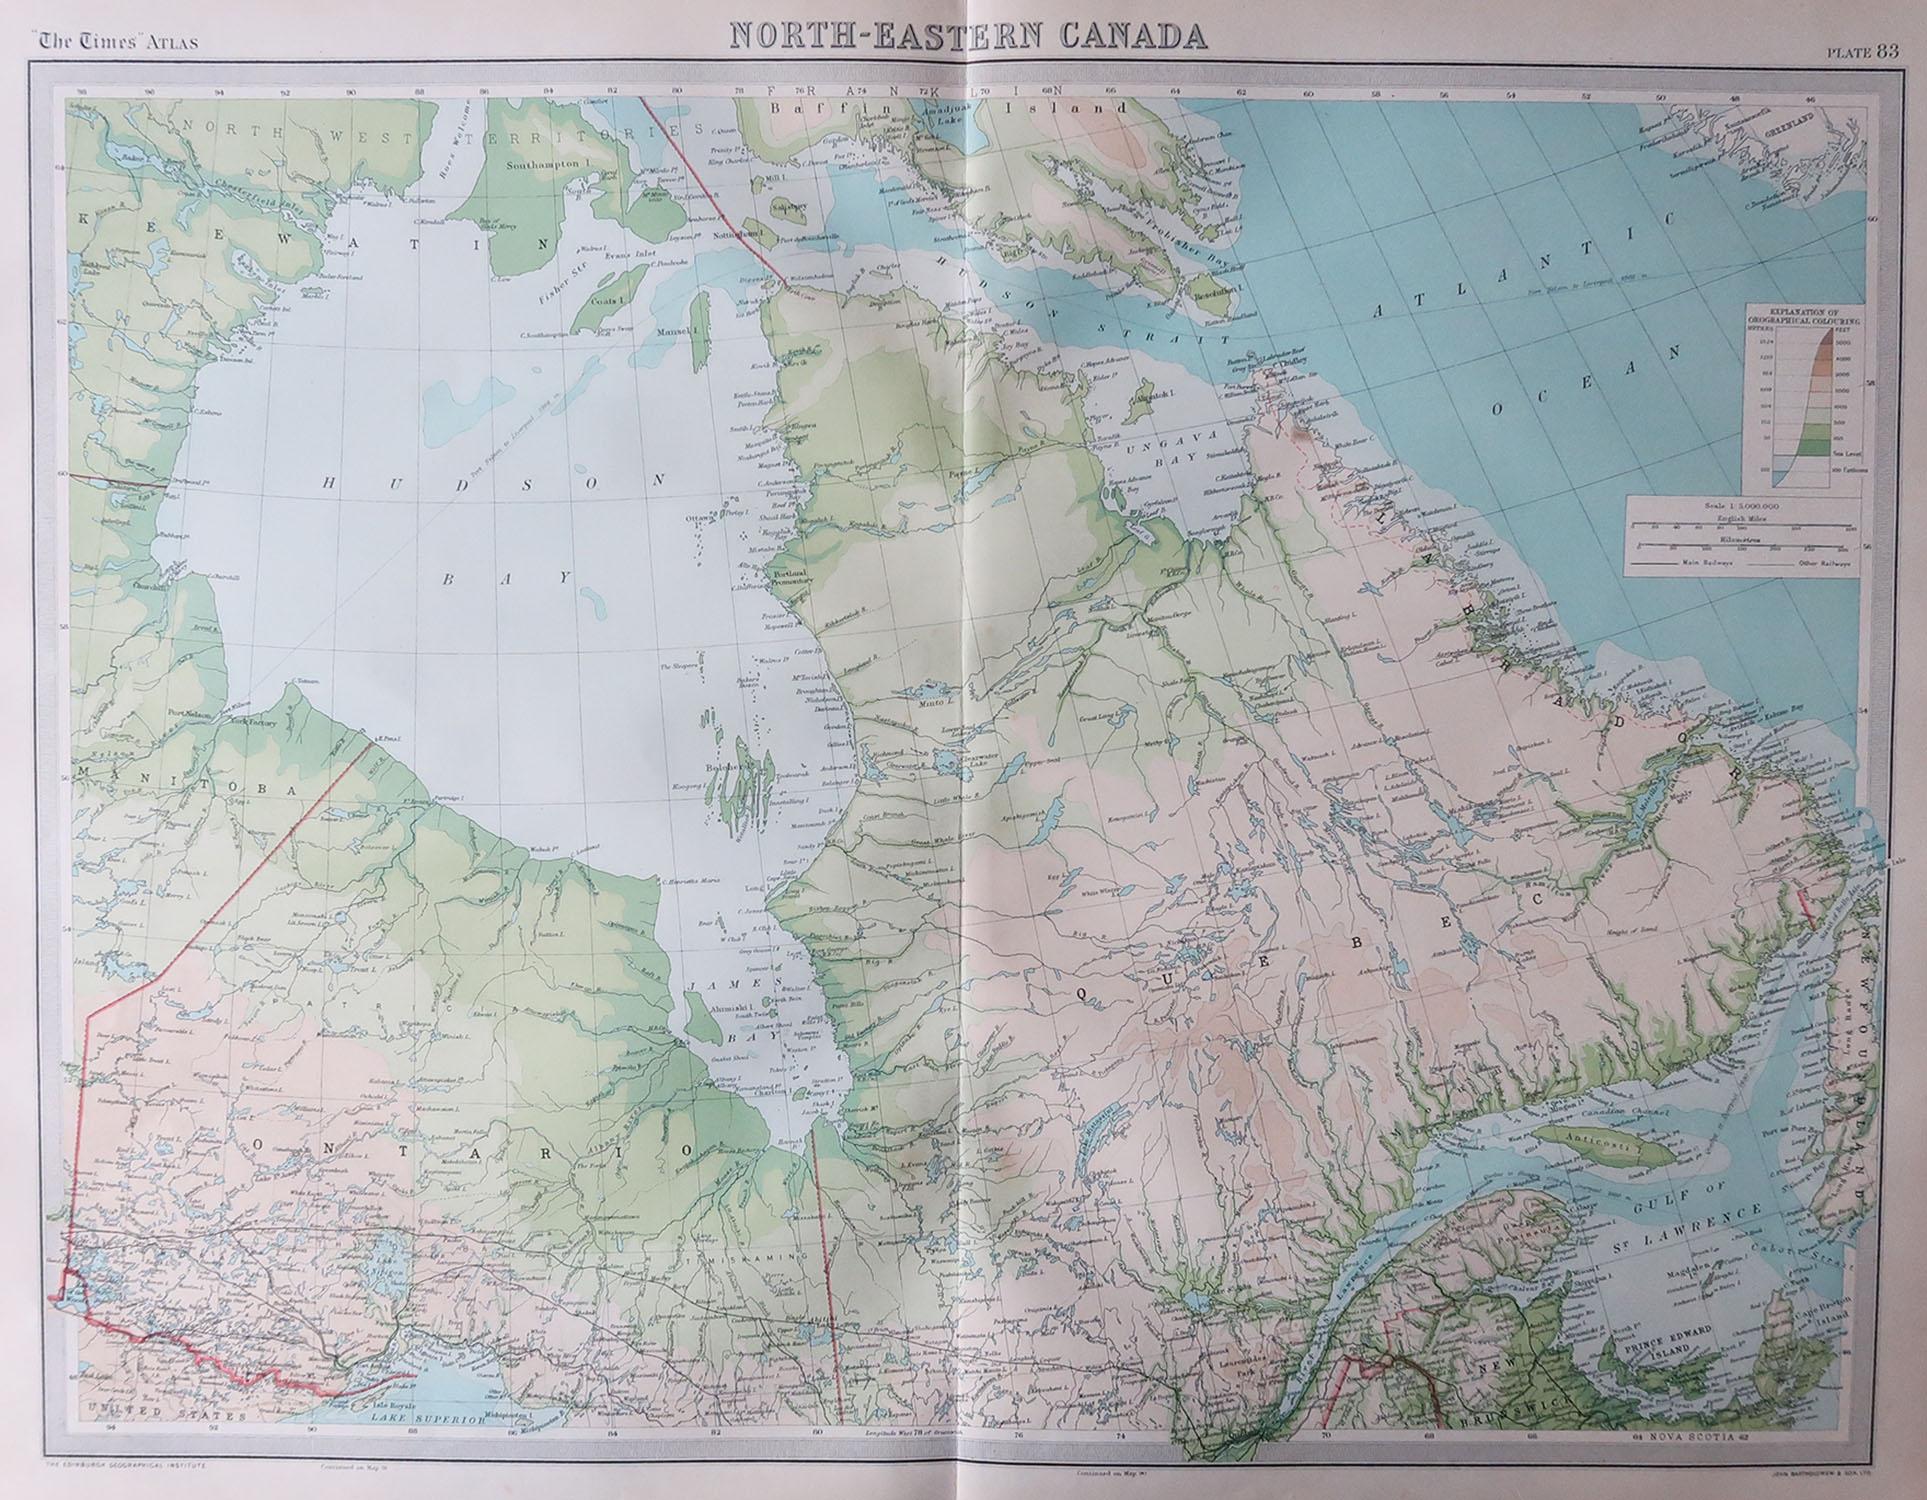 Great map of Quebec and Ontario.

Unframed

Original color

By John Bartholomew and Co. Edinburgh Geographical Institute

Published, circa 1920

Free shipping.
 